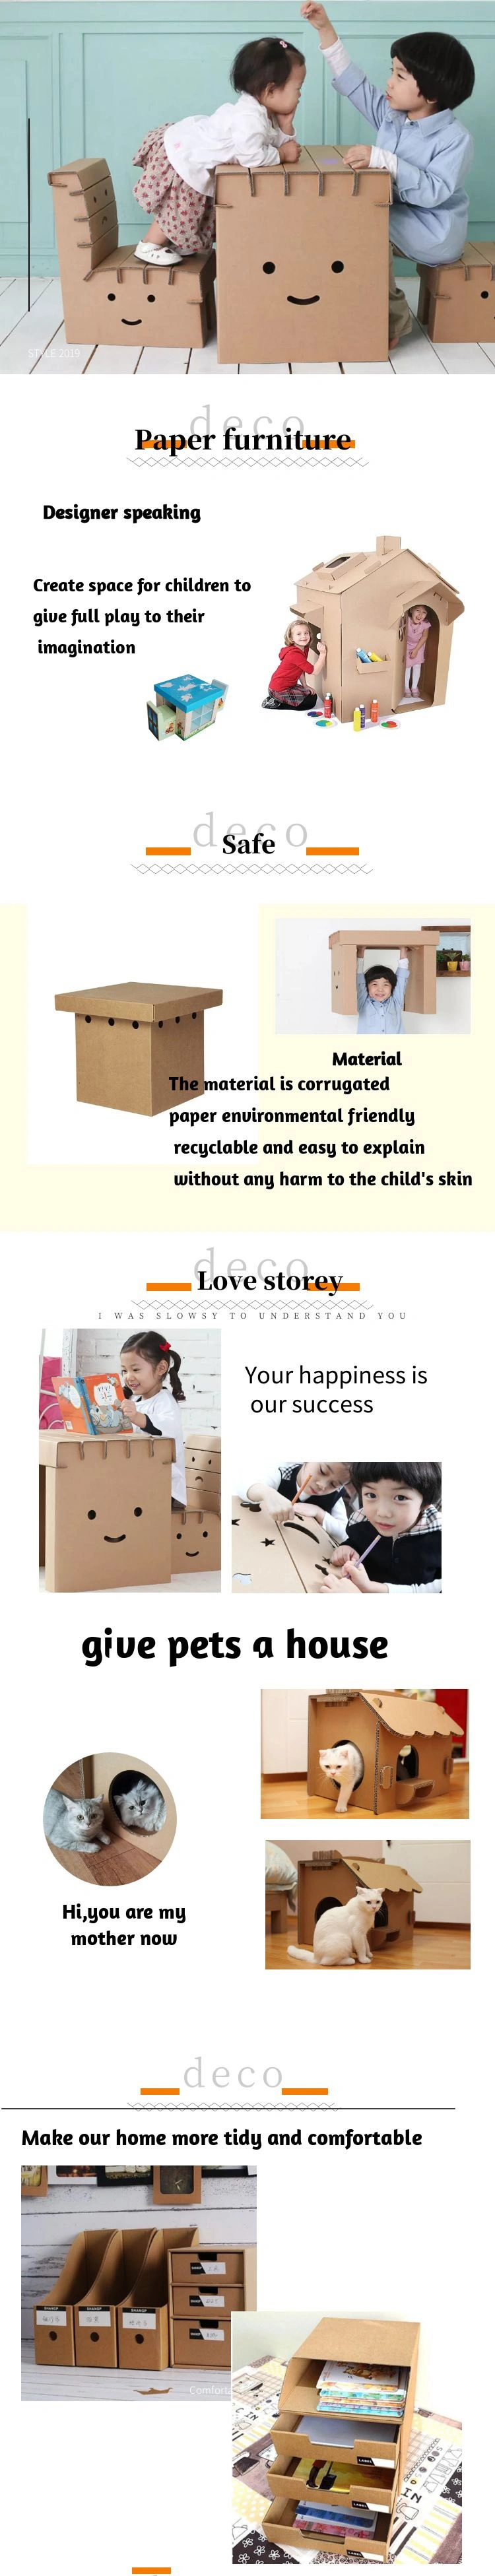 Wholesale White Color Cardboard Paper Castle for Kids Painting and Indoor Safe Play